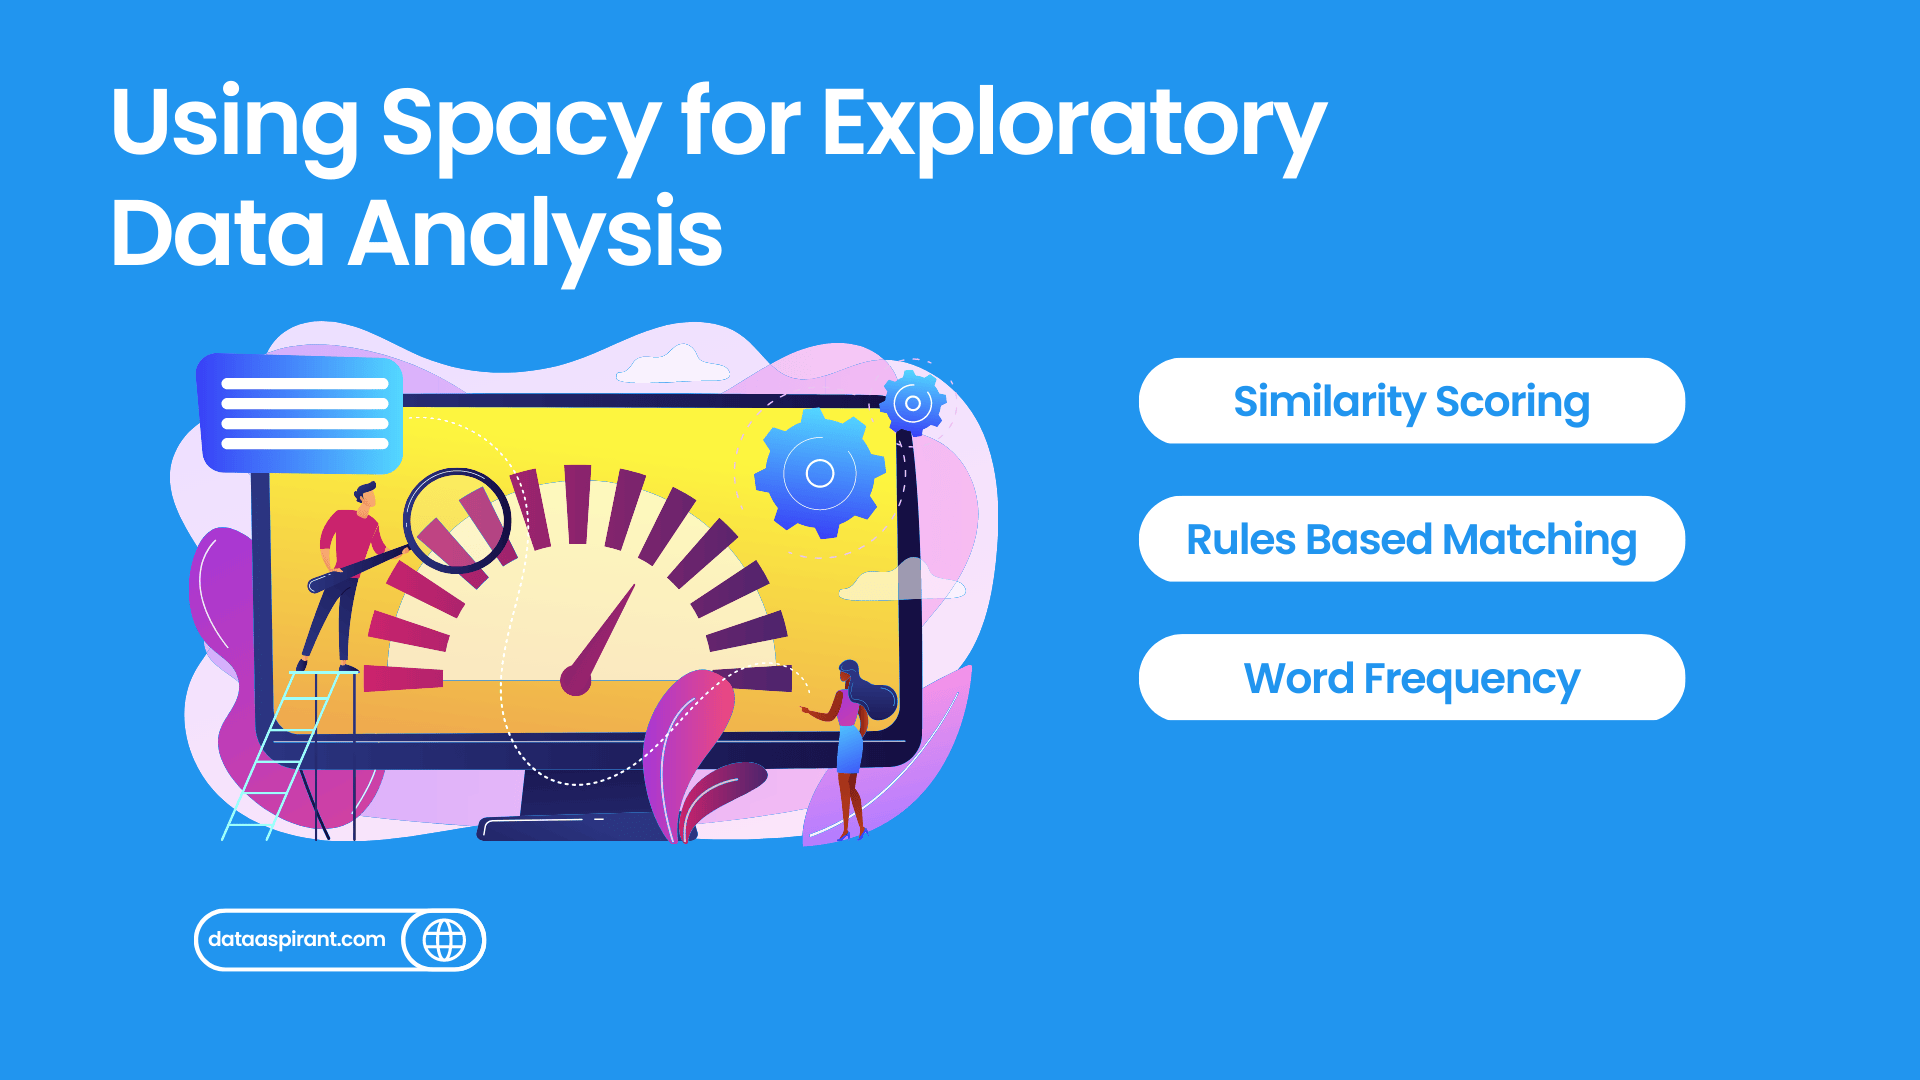 Using Spacy for Exploratory Data Analysis